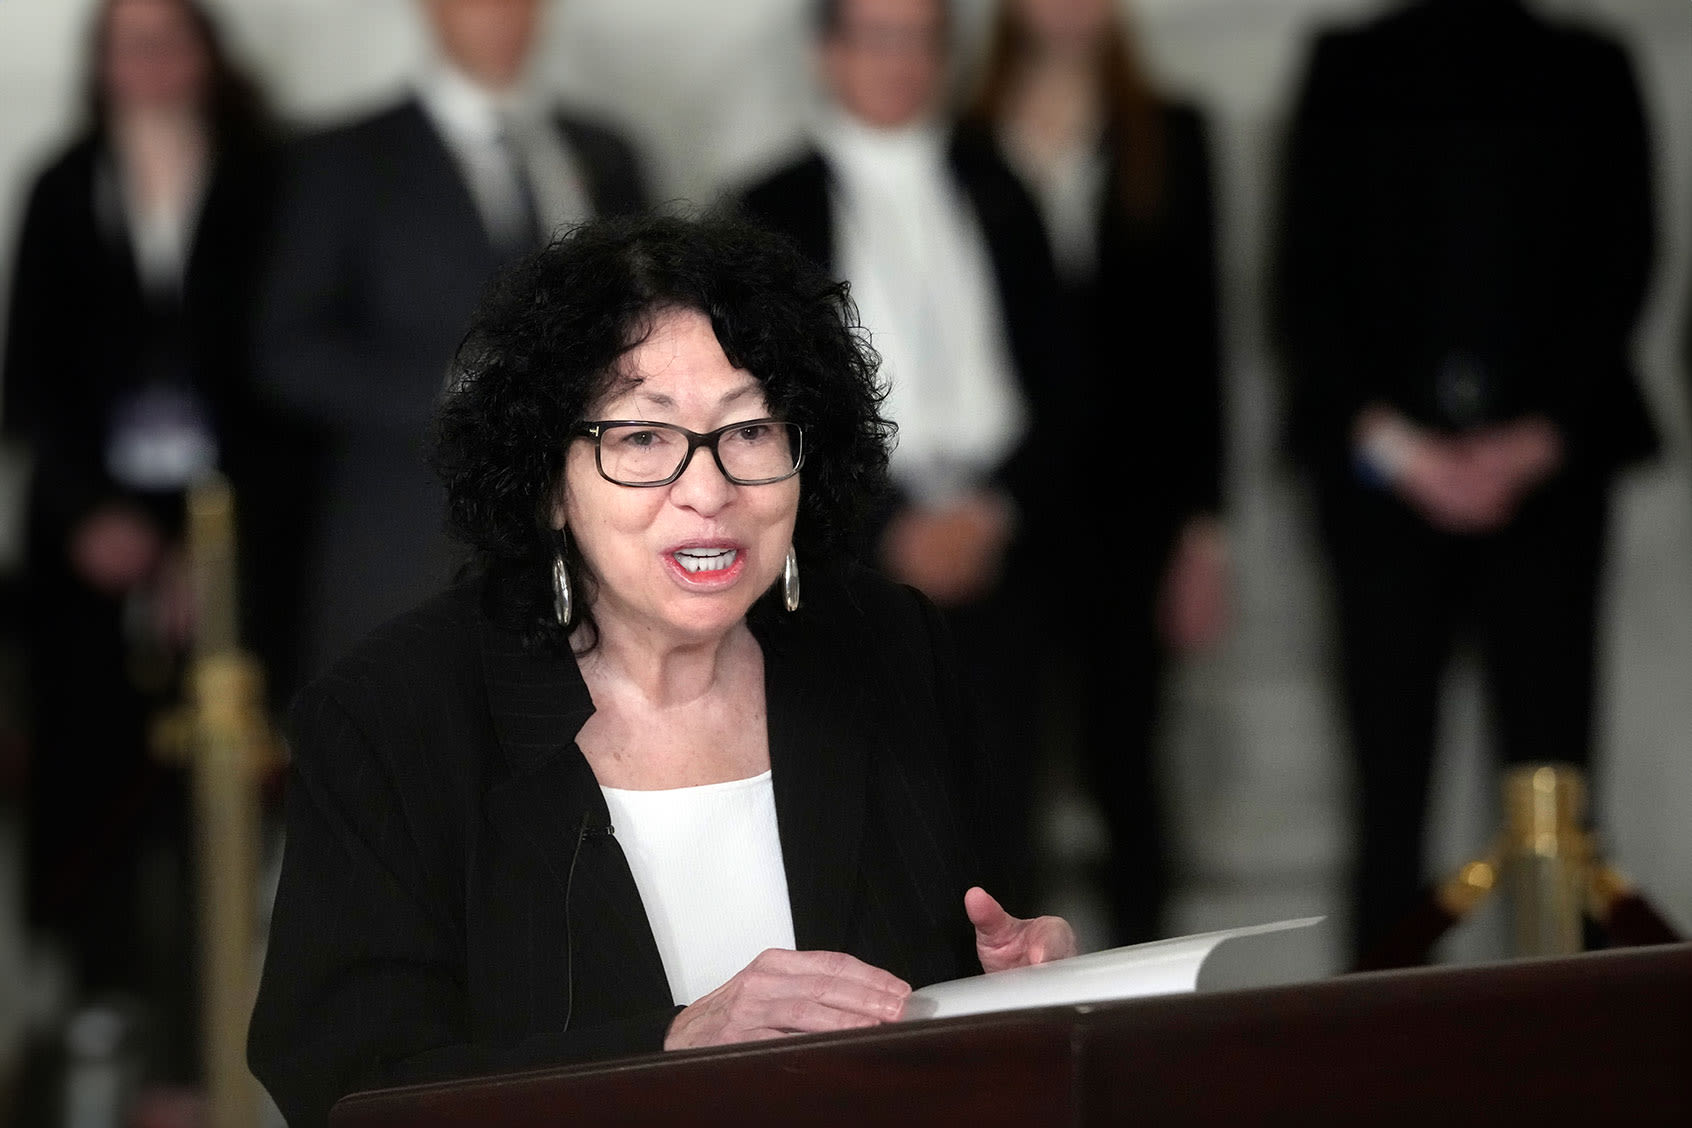 "Power grab": Sotomayor warns that alarming SCOTUS ruling is "part of a disconcerting trend"